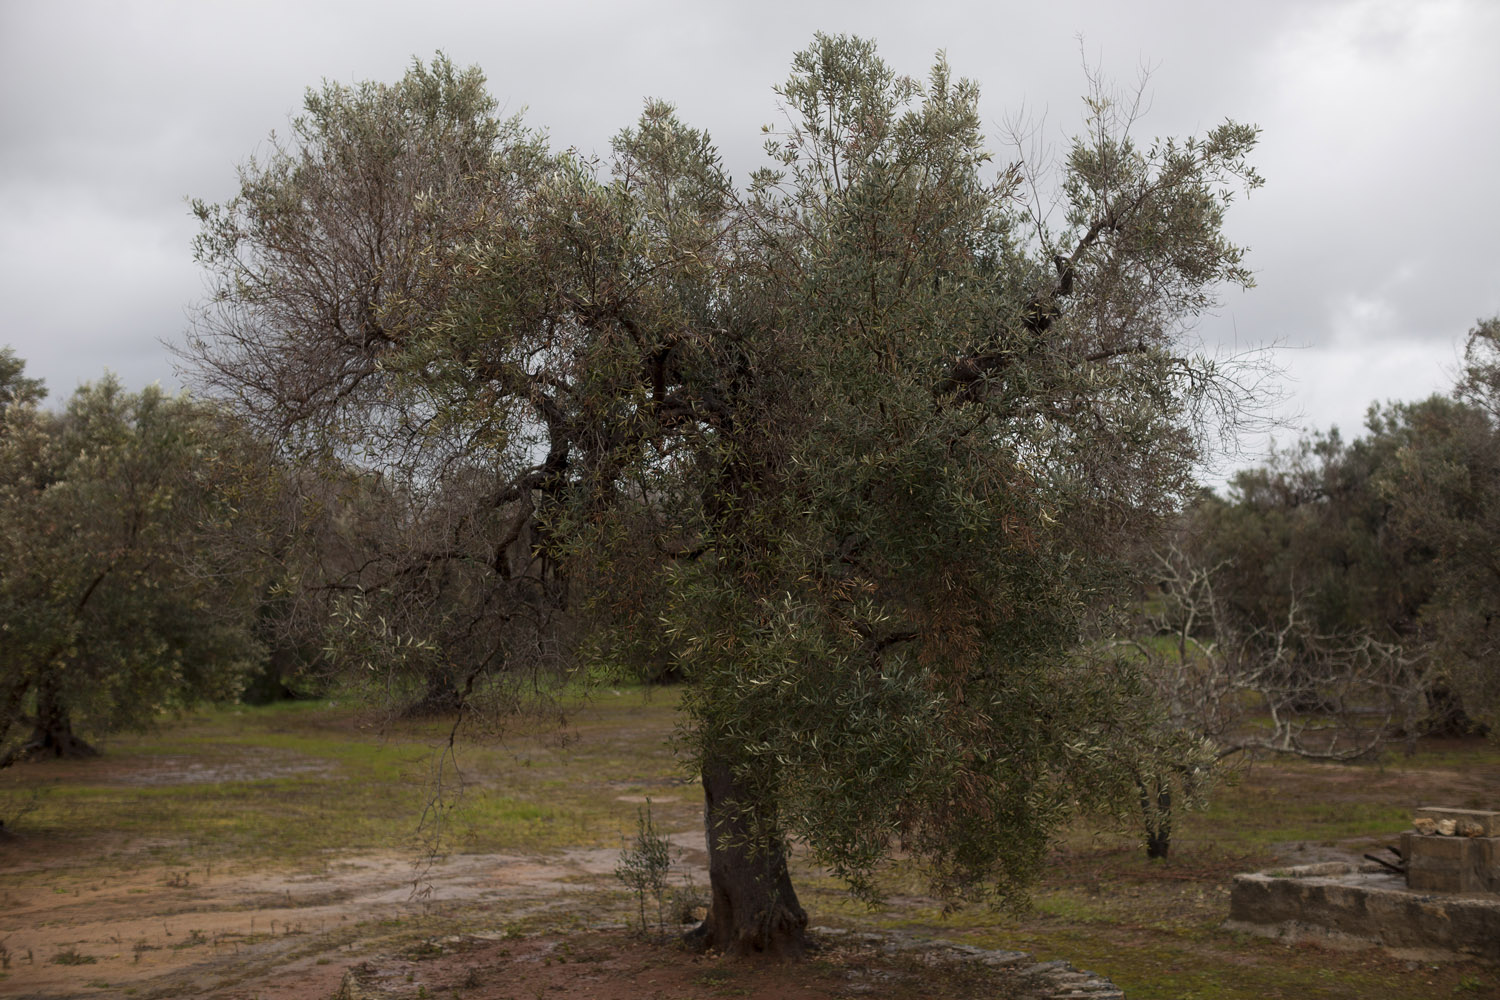 An olive tree in Salento. Thousands of trees began showing leaf scorch and various other symptoms in the first years of the past decade, and then these symptos exploded through Salento, with millions of trees affected. (2018)